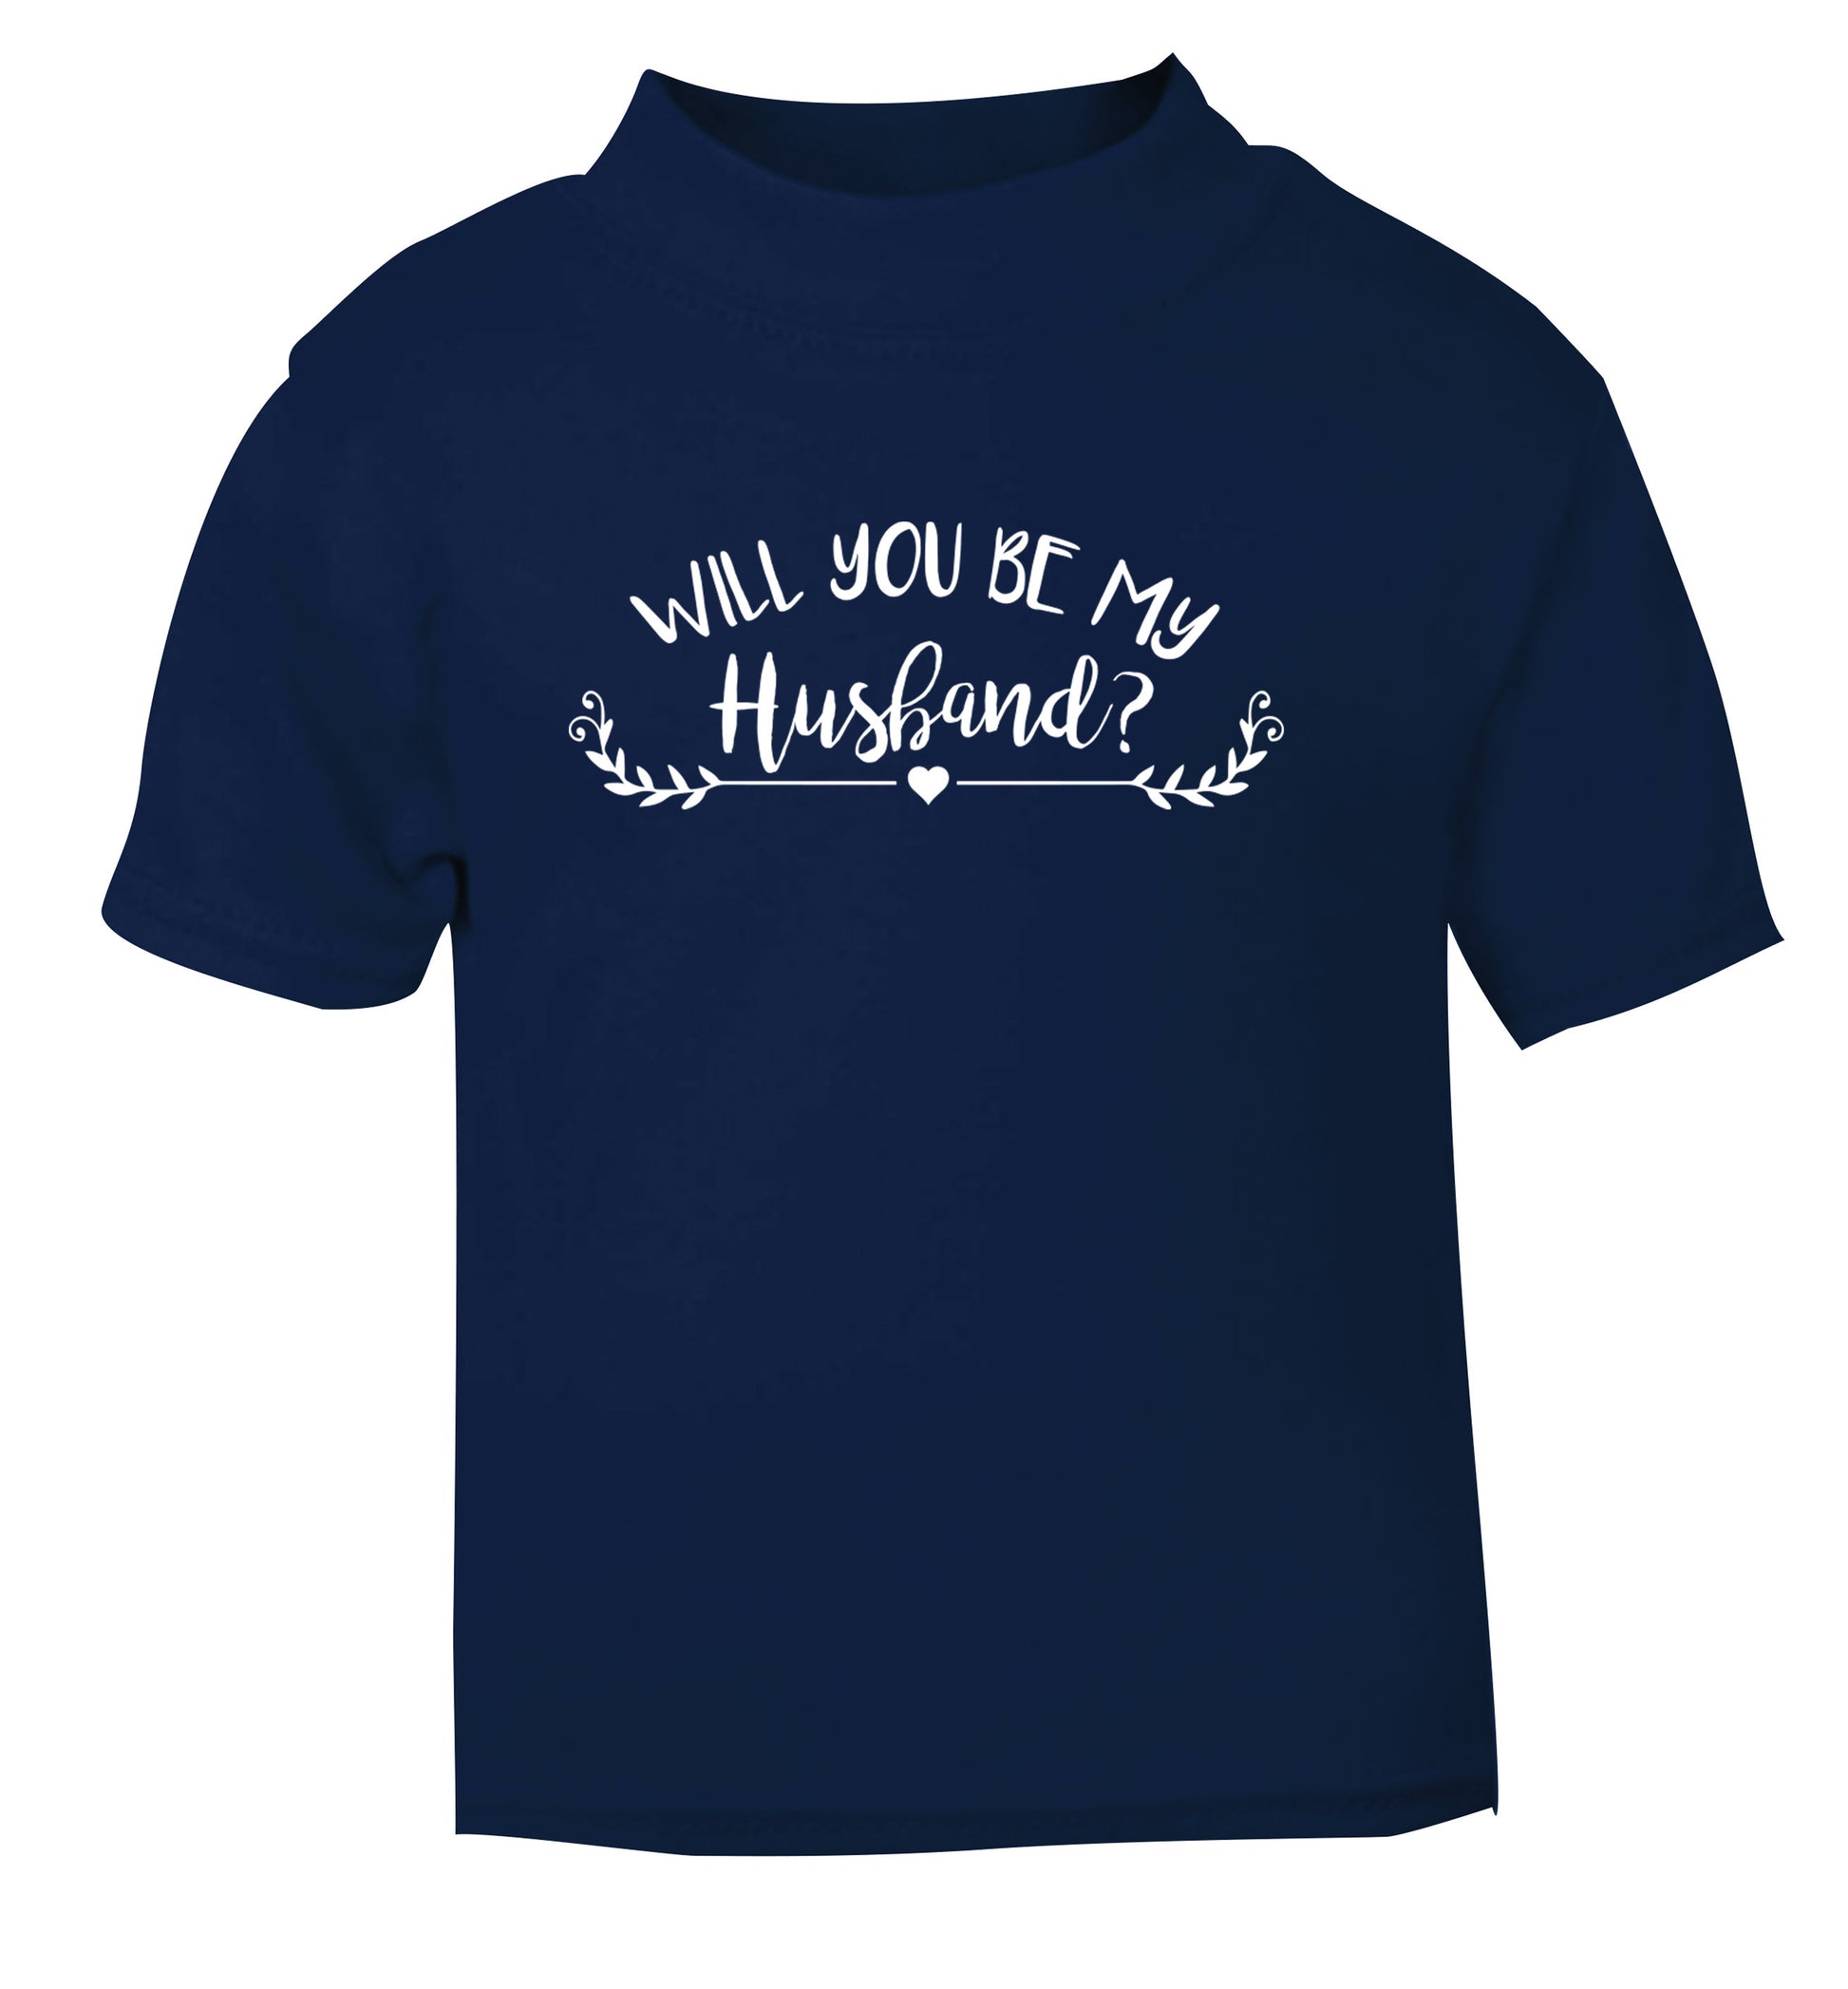 Will you be my husband? navy Baby Toddler Tshirt 2 Years